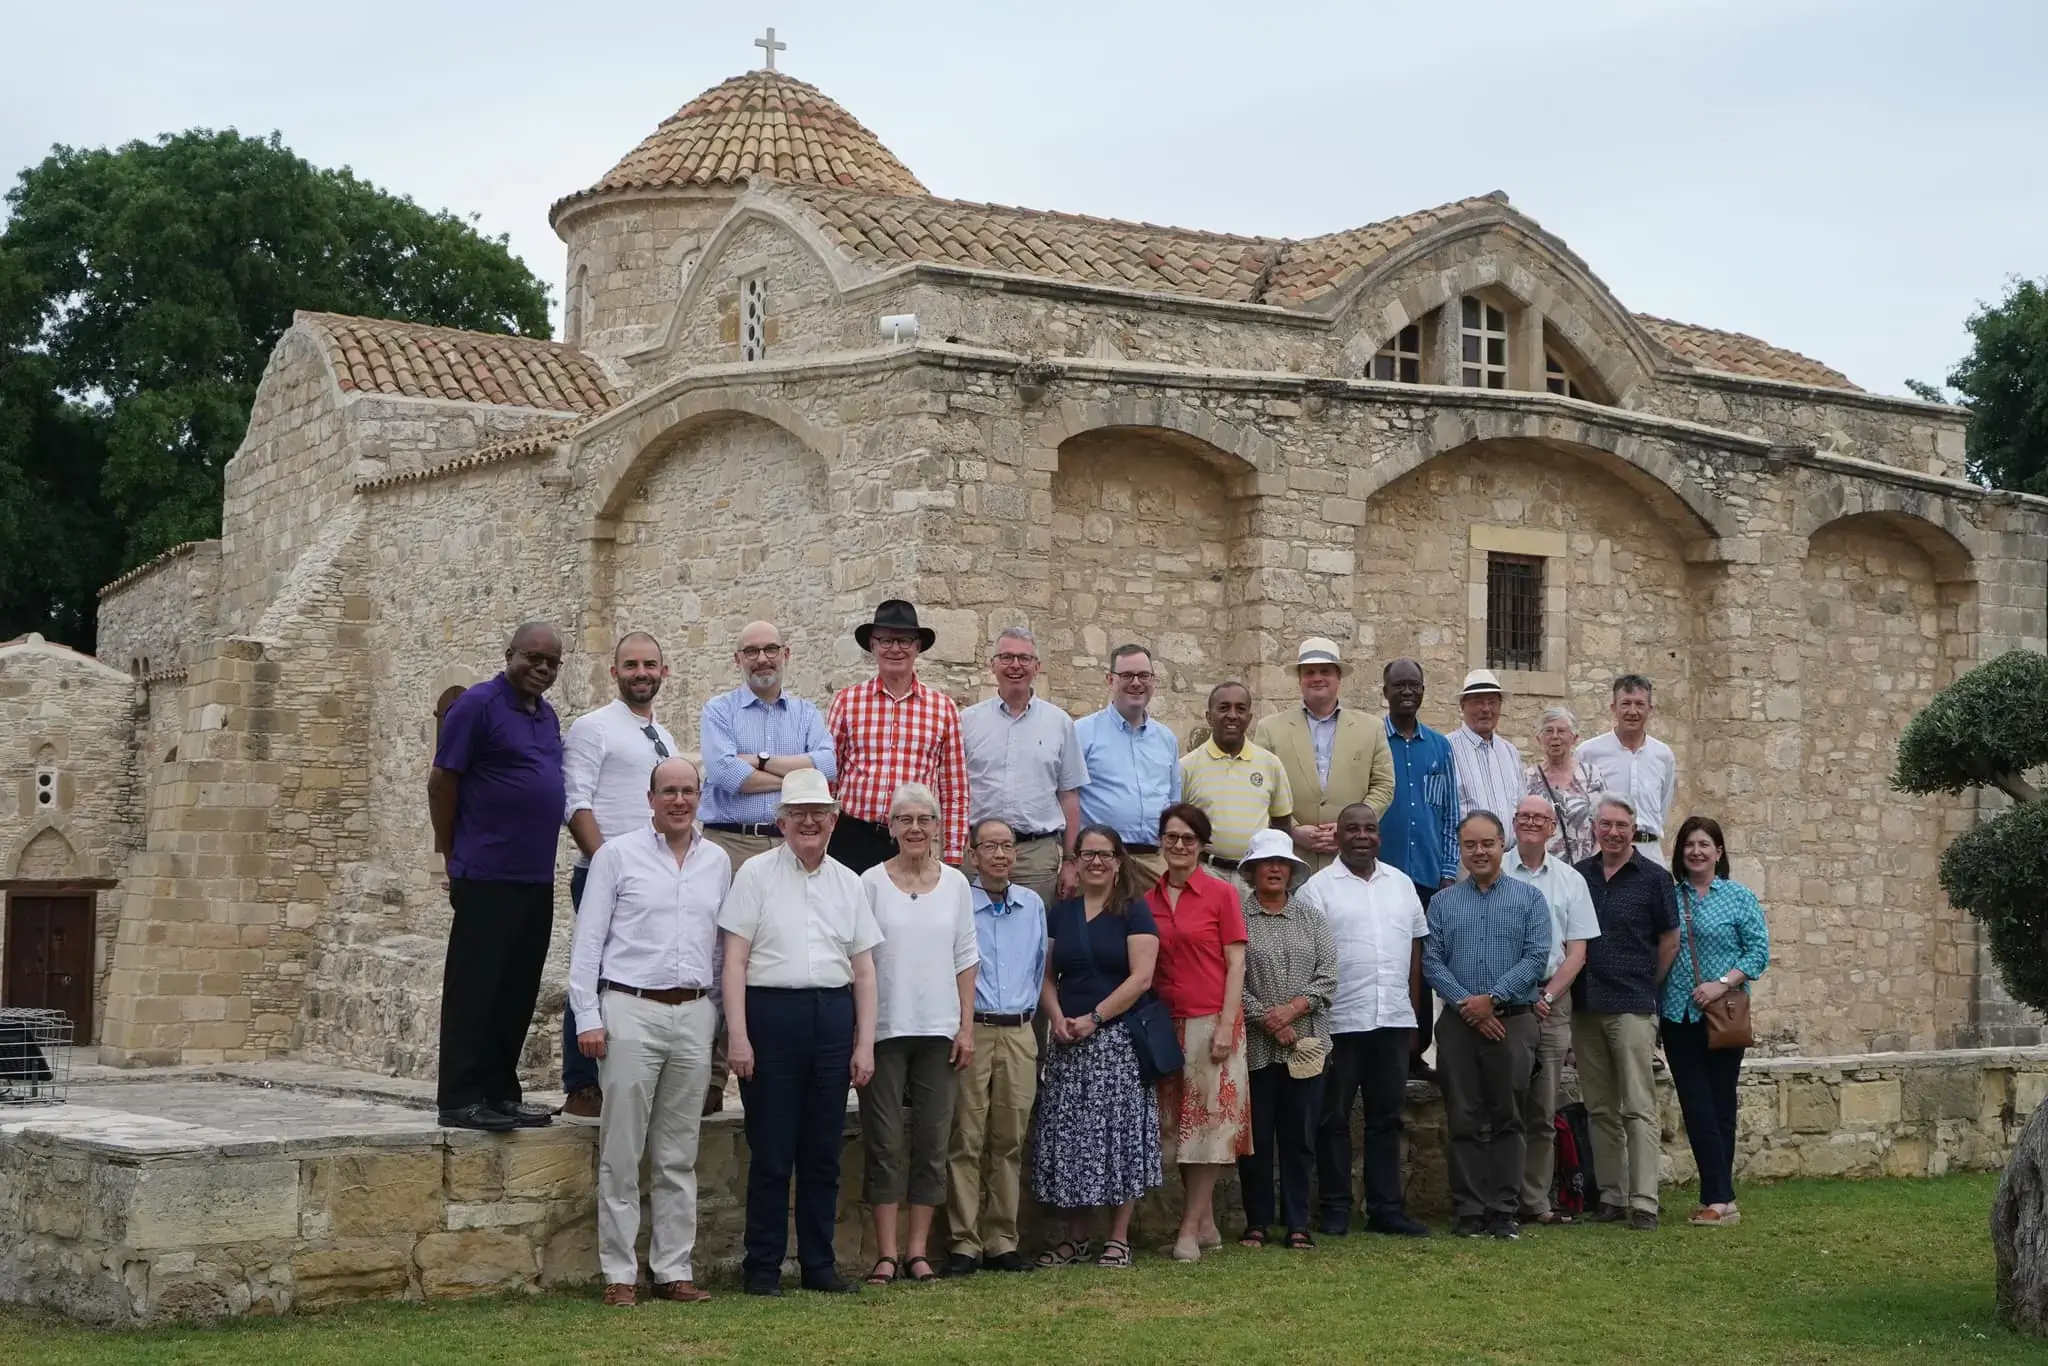 During their meeting in Larnaca, the members and staff of ARCIC III visited the Church of Panagia Angeloktisti (Παναγία Αγγελόκτιστη, 'Panagia Built by Angels') in the village of Kiti, Cyprus. Back row: Bishop Garth Minott, Revd Stewart Clem, Archdeacon Jonathan Gough, Archbishop Philip Freier, Revd Anthony Currer, Revd Martin Browne OSB, Revd Vimal Tirimanna CSsR, Revd Alexander Ross, Revd Paul Béré SJ, Bishop Christopher Hill, Hilary Hill (guest), Revd Neil Vigers. Front row: Dr Christopher Wells, Archbishop Bernard Longley, Archbishop Linda Nicholls, Revd Albino Barrera OP, Dr Kristin Colberg, Dr Sigrid Müller, Dr Moeawa Callaghan, Revd Isaias Chachine, Dr Emmanuel Nathan, Revd Peter Sedgwick, Dr Paul Murray, Andrea Murray (guest)